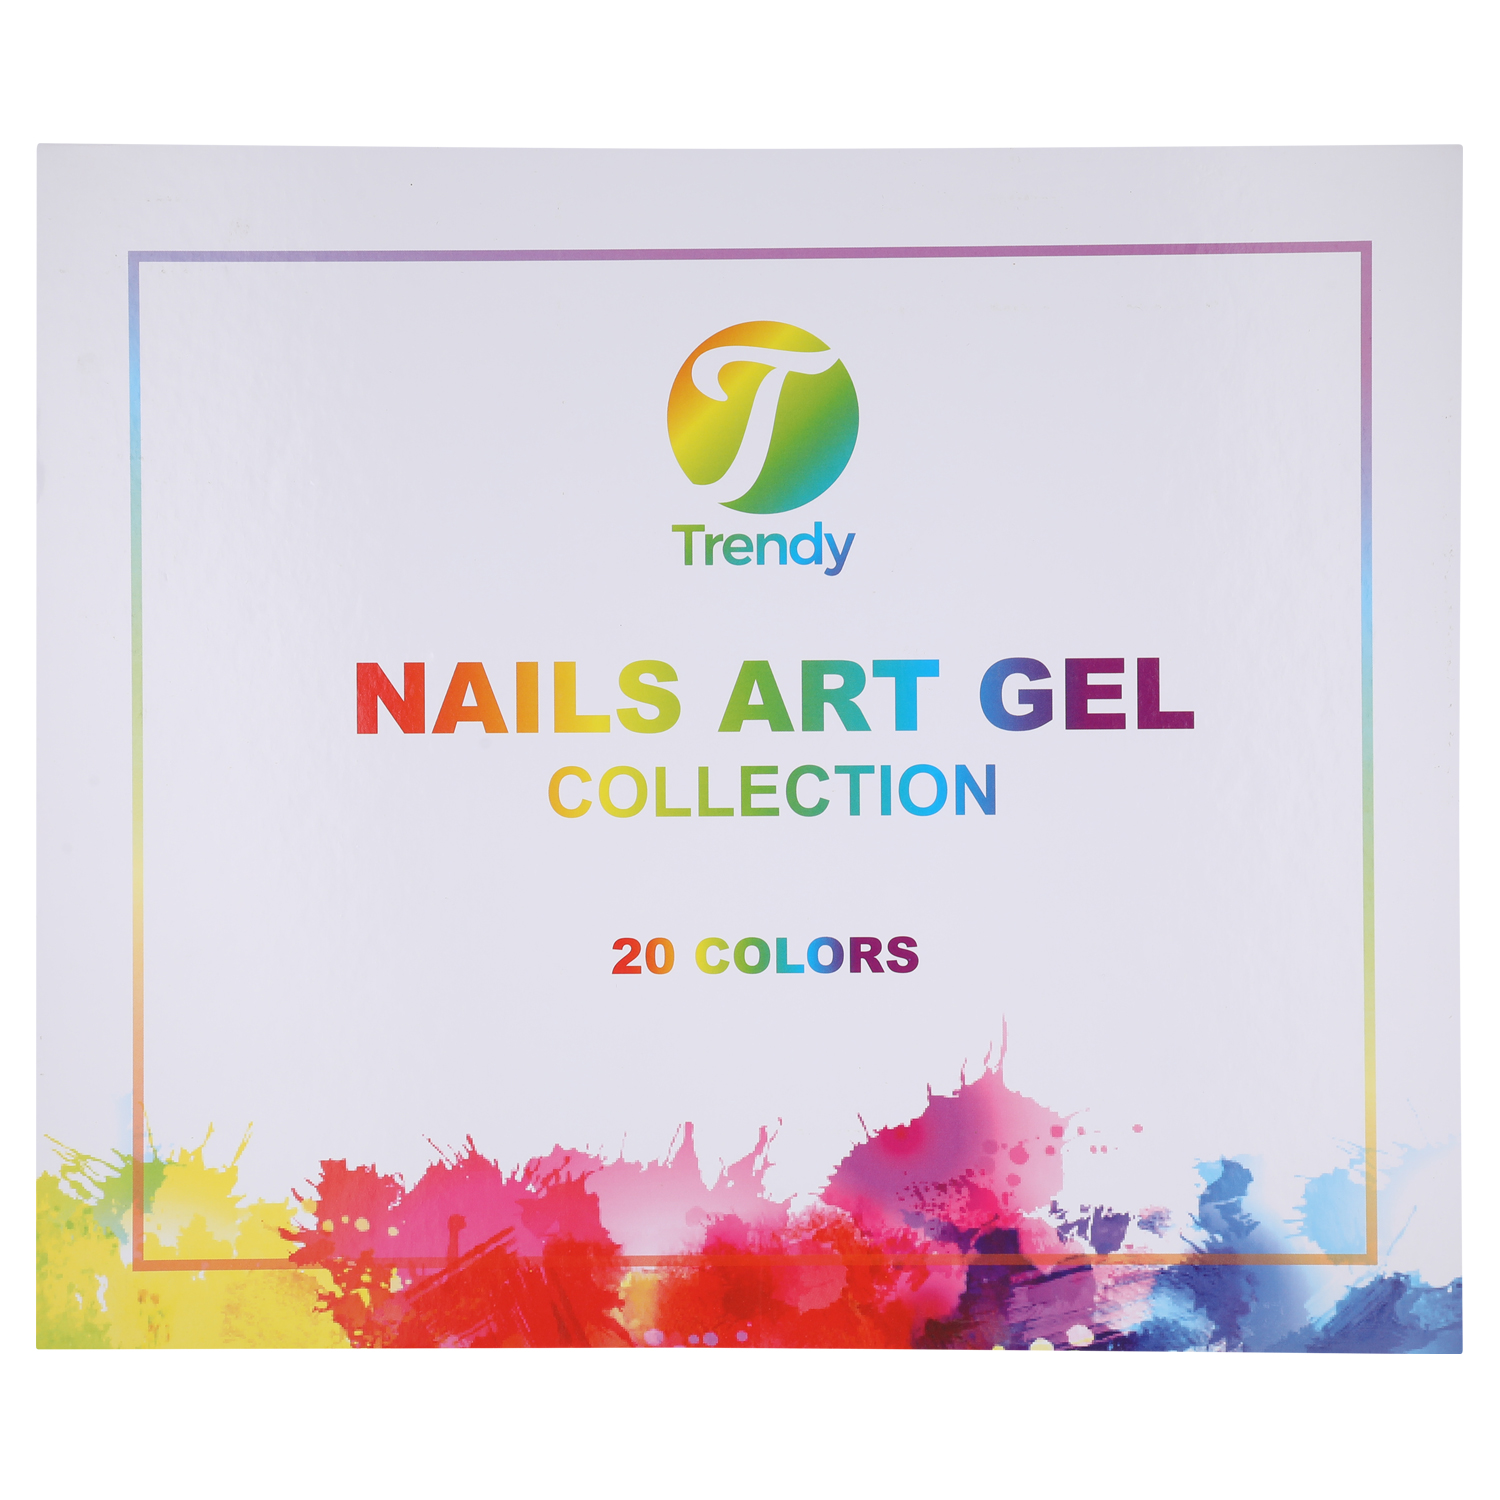 Trendy Nails Art Gel Collection 20 colors – Trendy dippingg